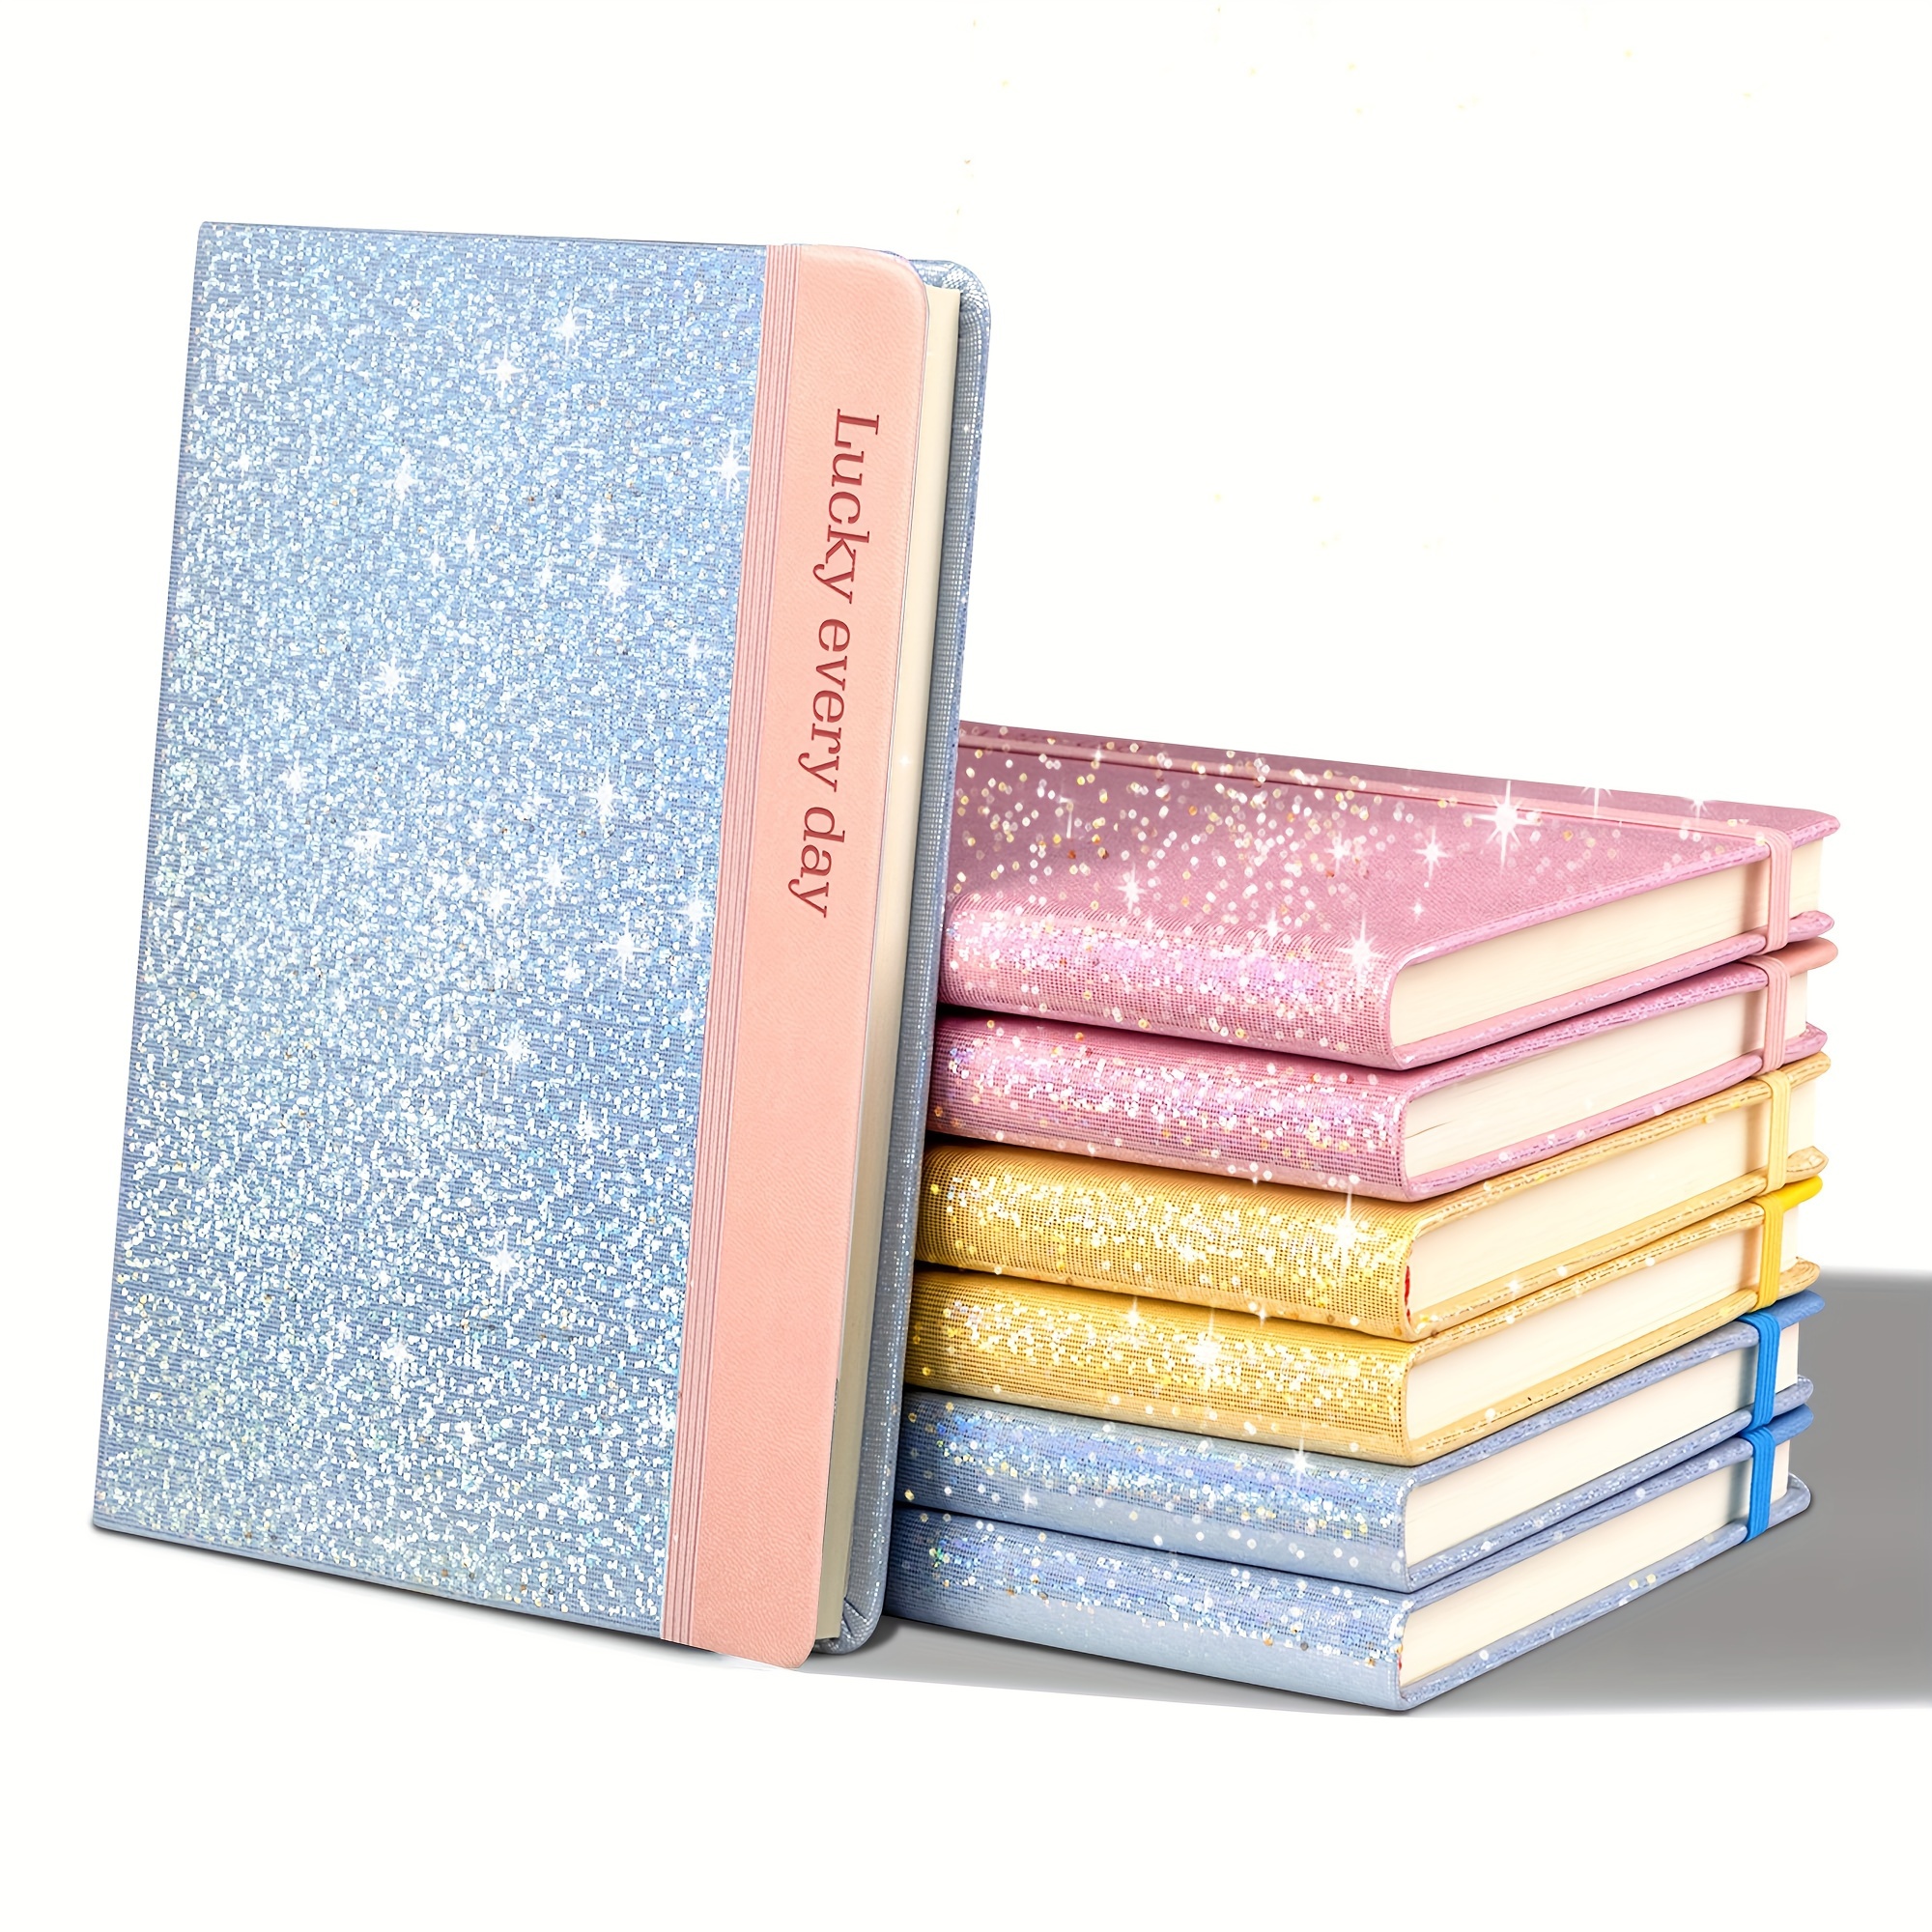 360 Page Notebook B5 Notebook Journaling Notebooks Church Notes